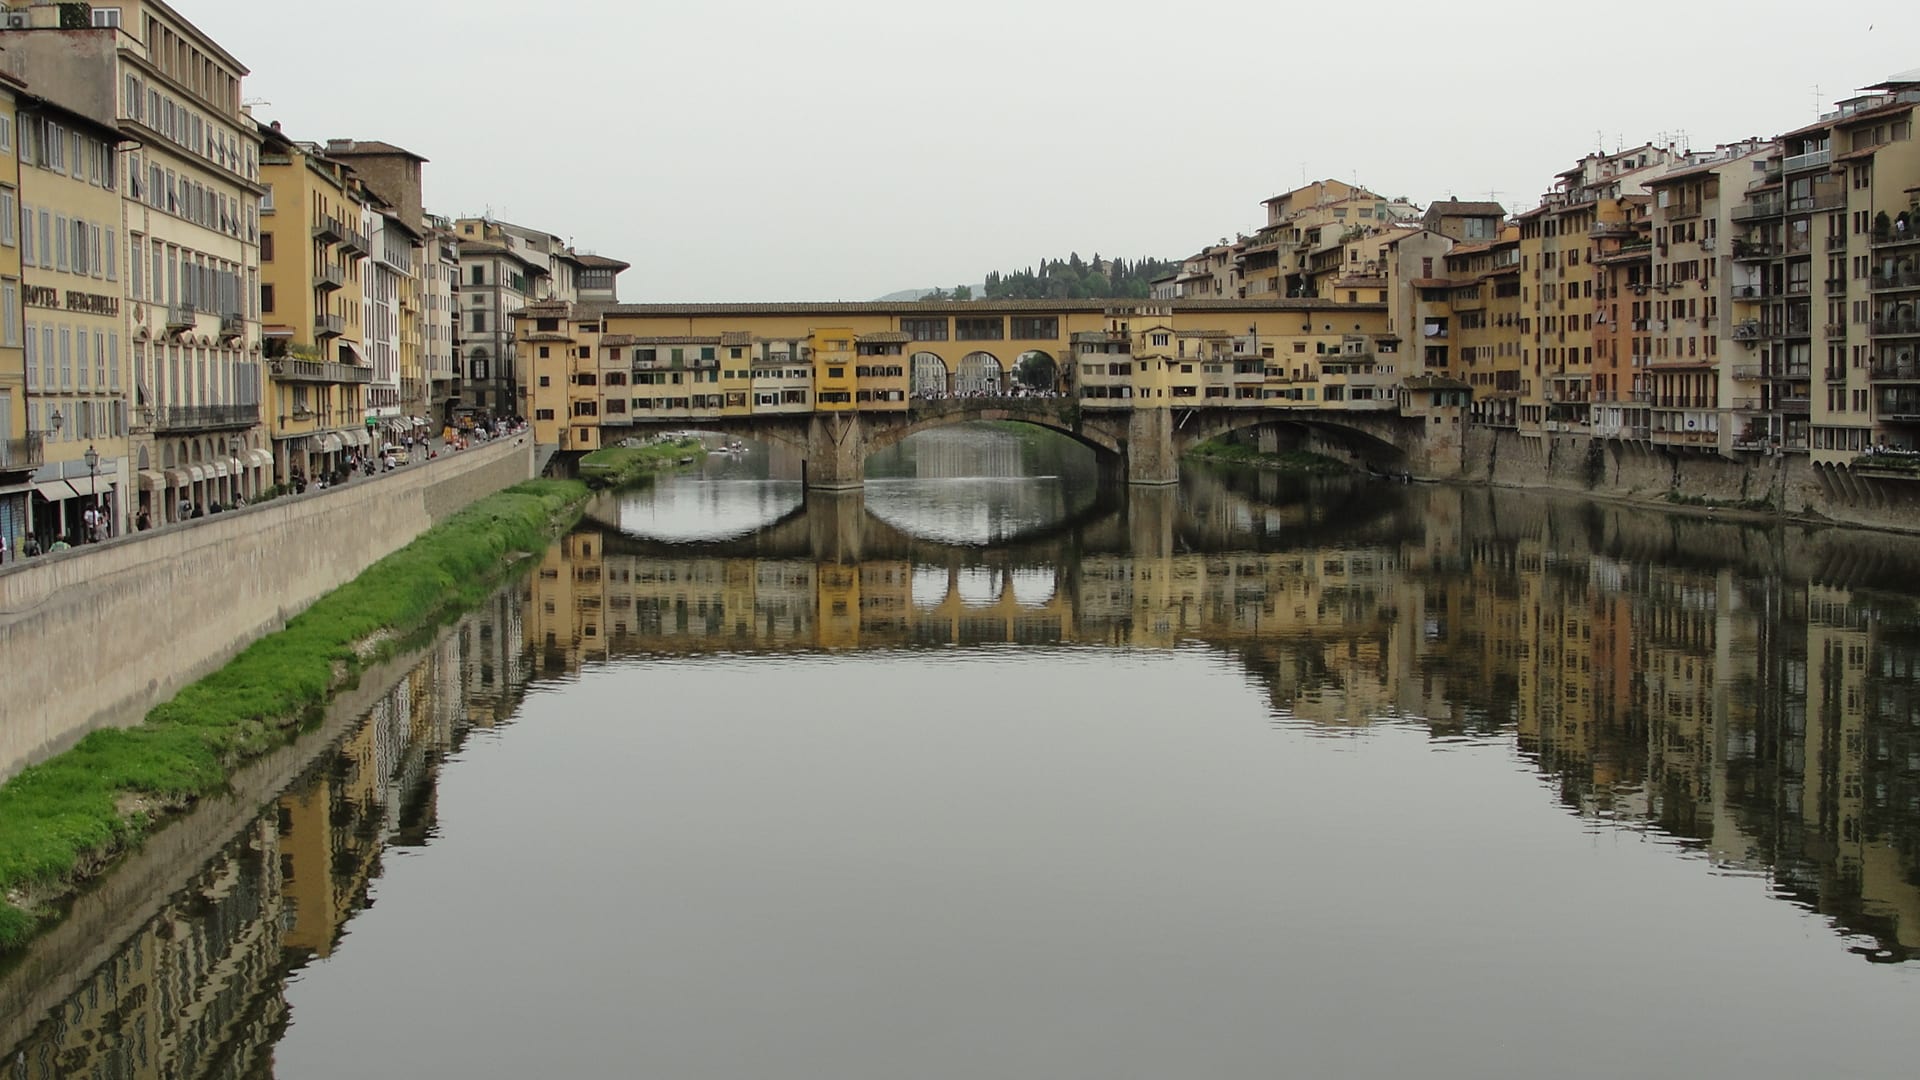 Tuscany & Umbria Driving Tour with Classic Travelling - Florence